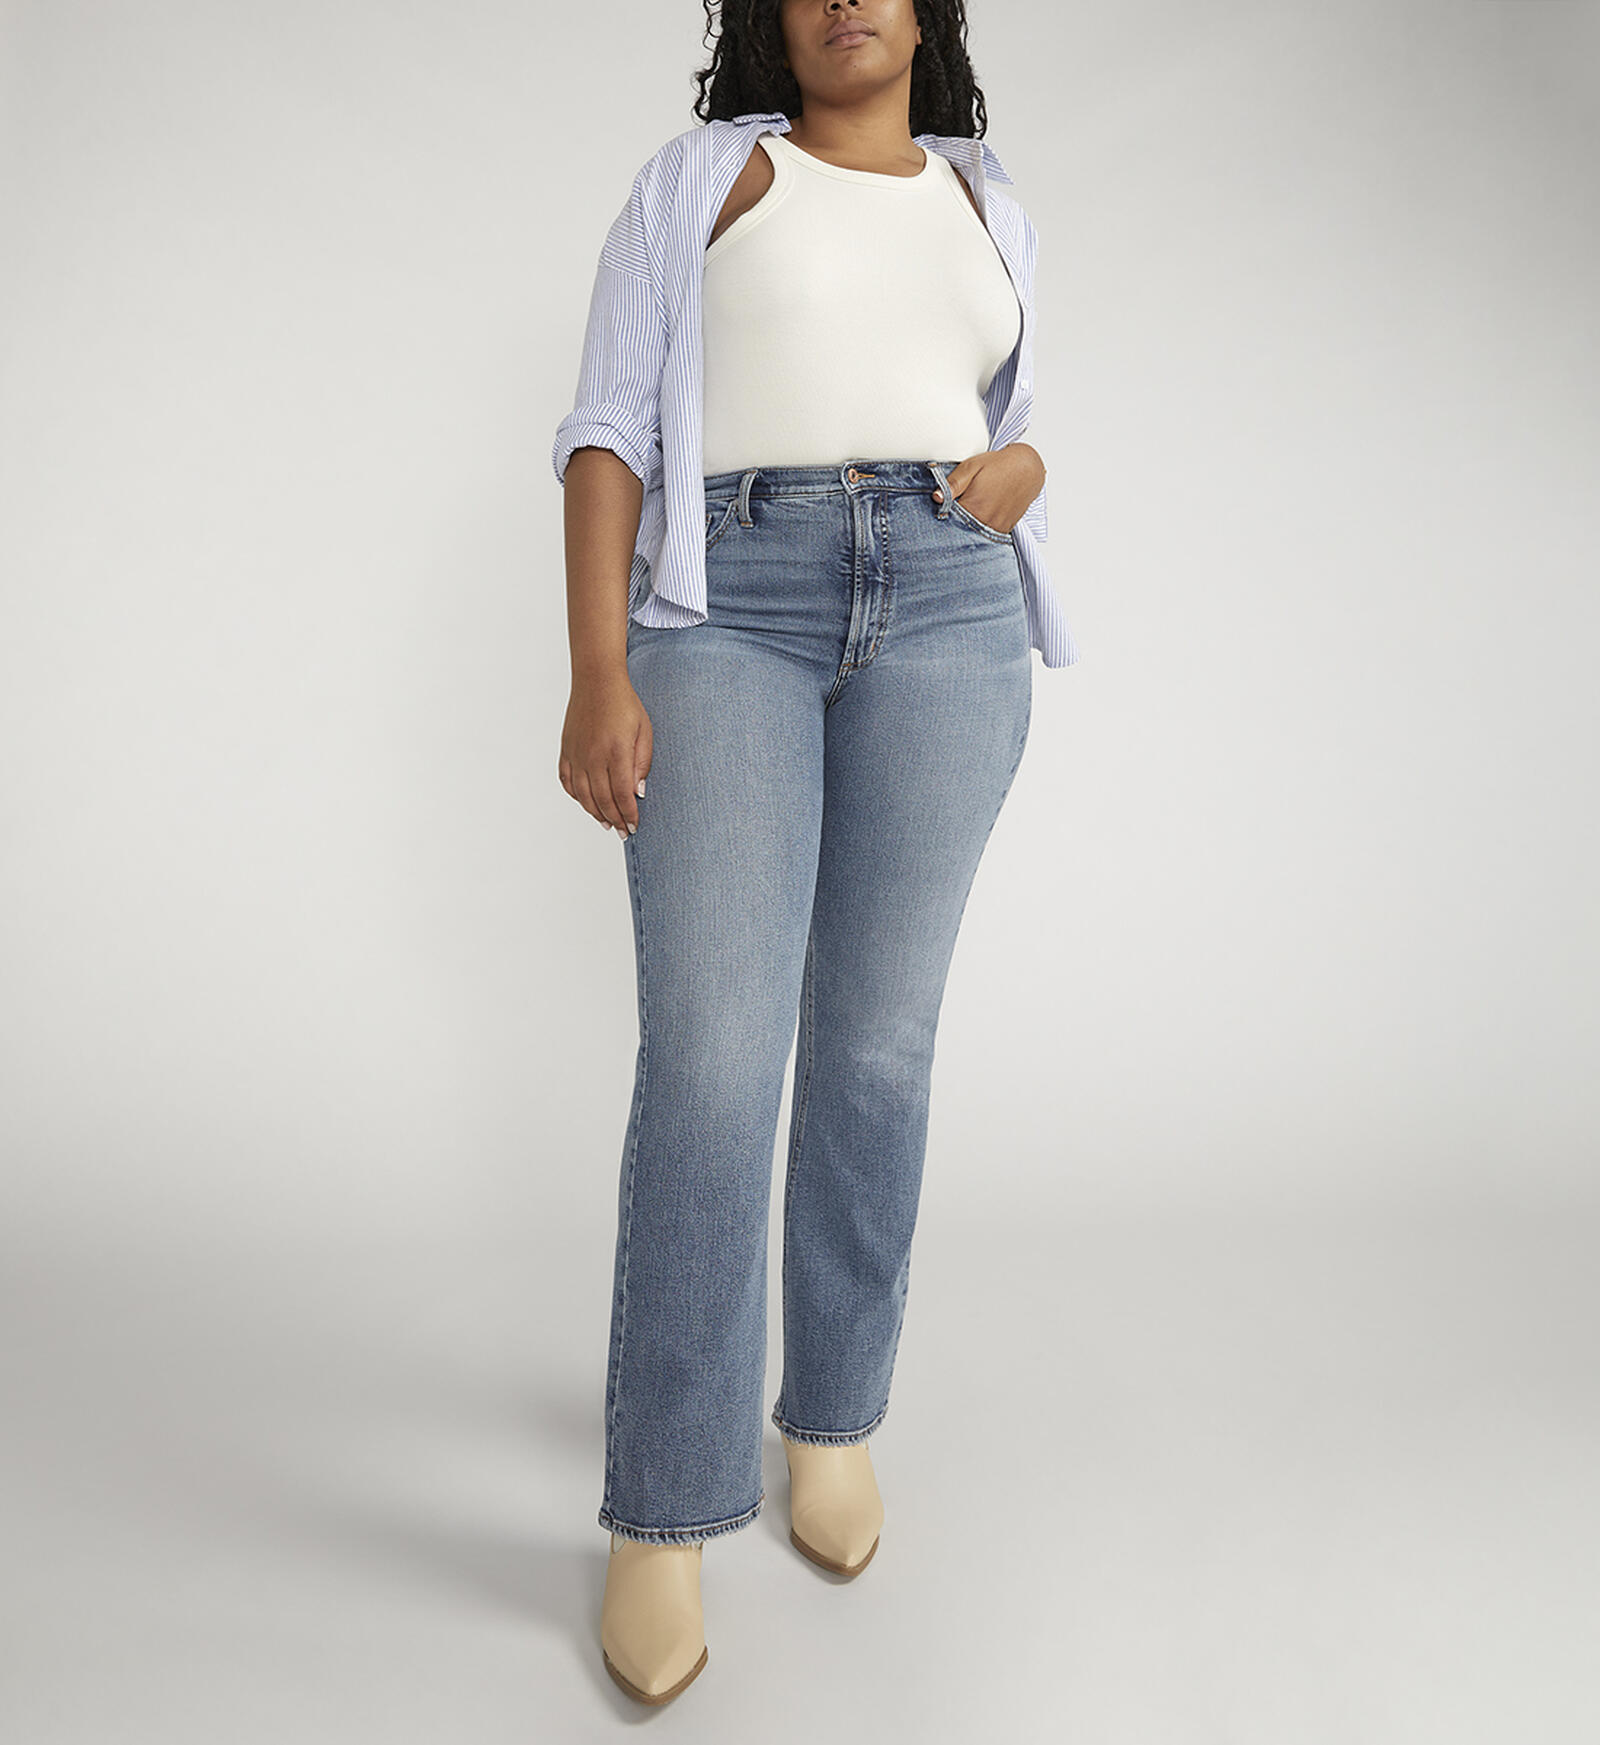 Buy 90s Vintage High Rise Bootcut Jeans Plus Size for USD 54.00